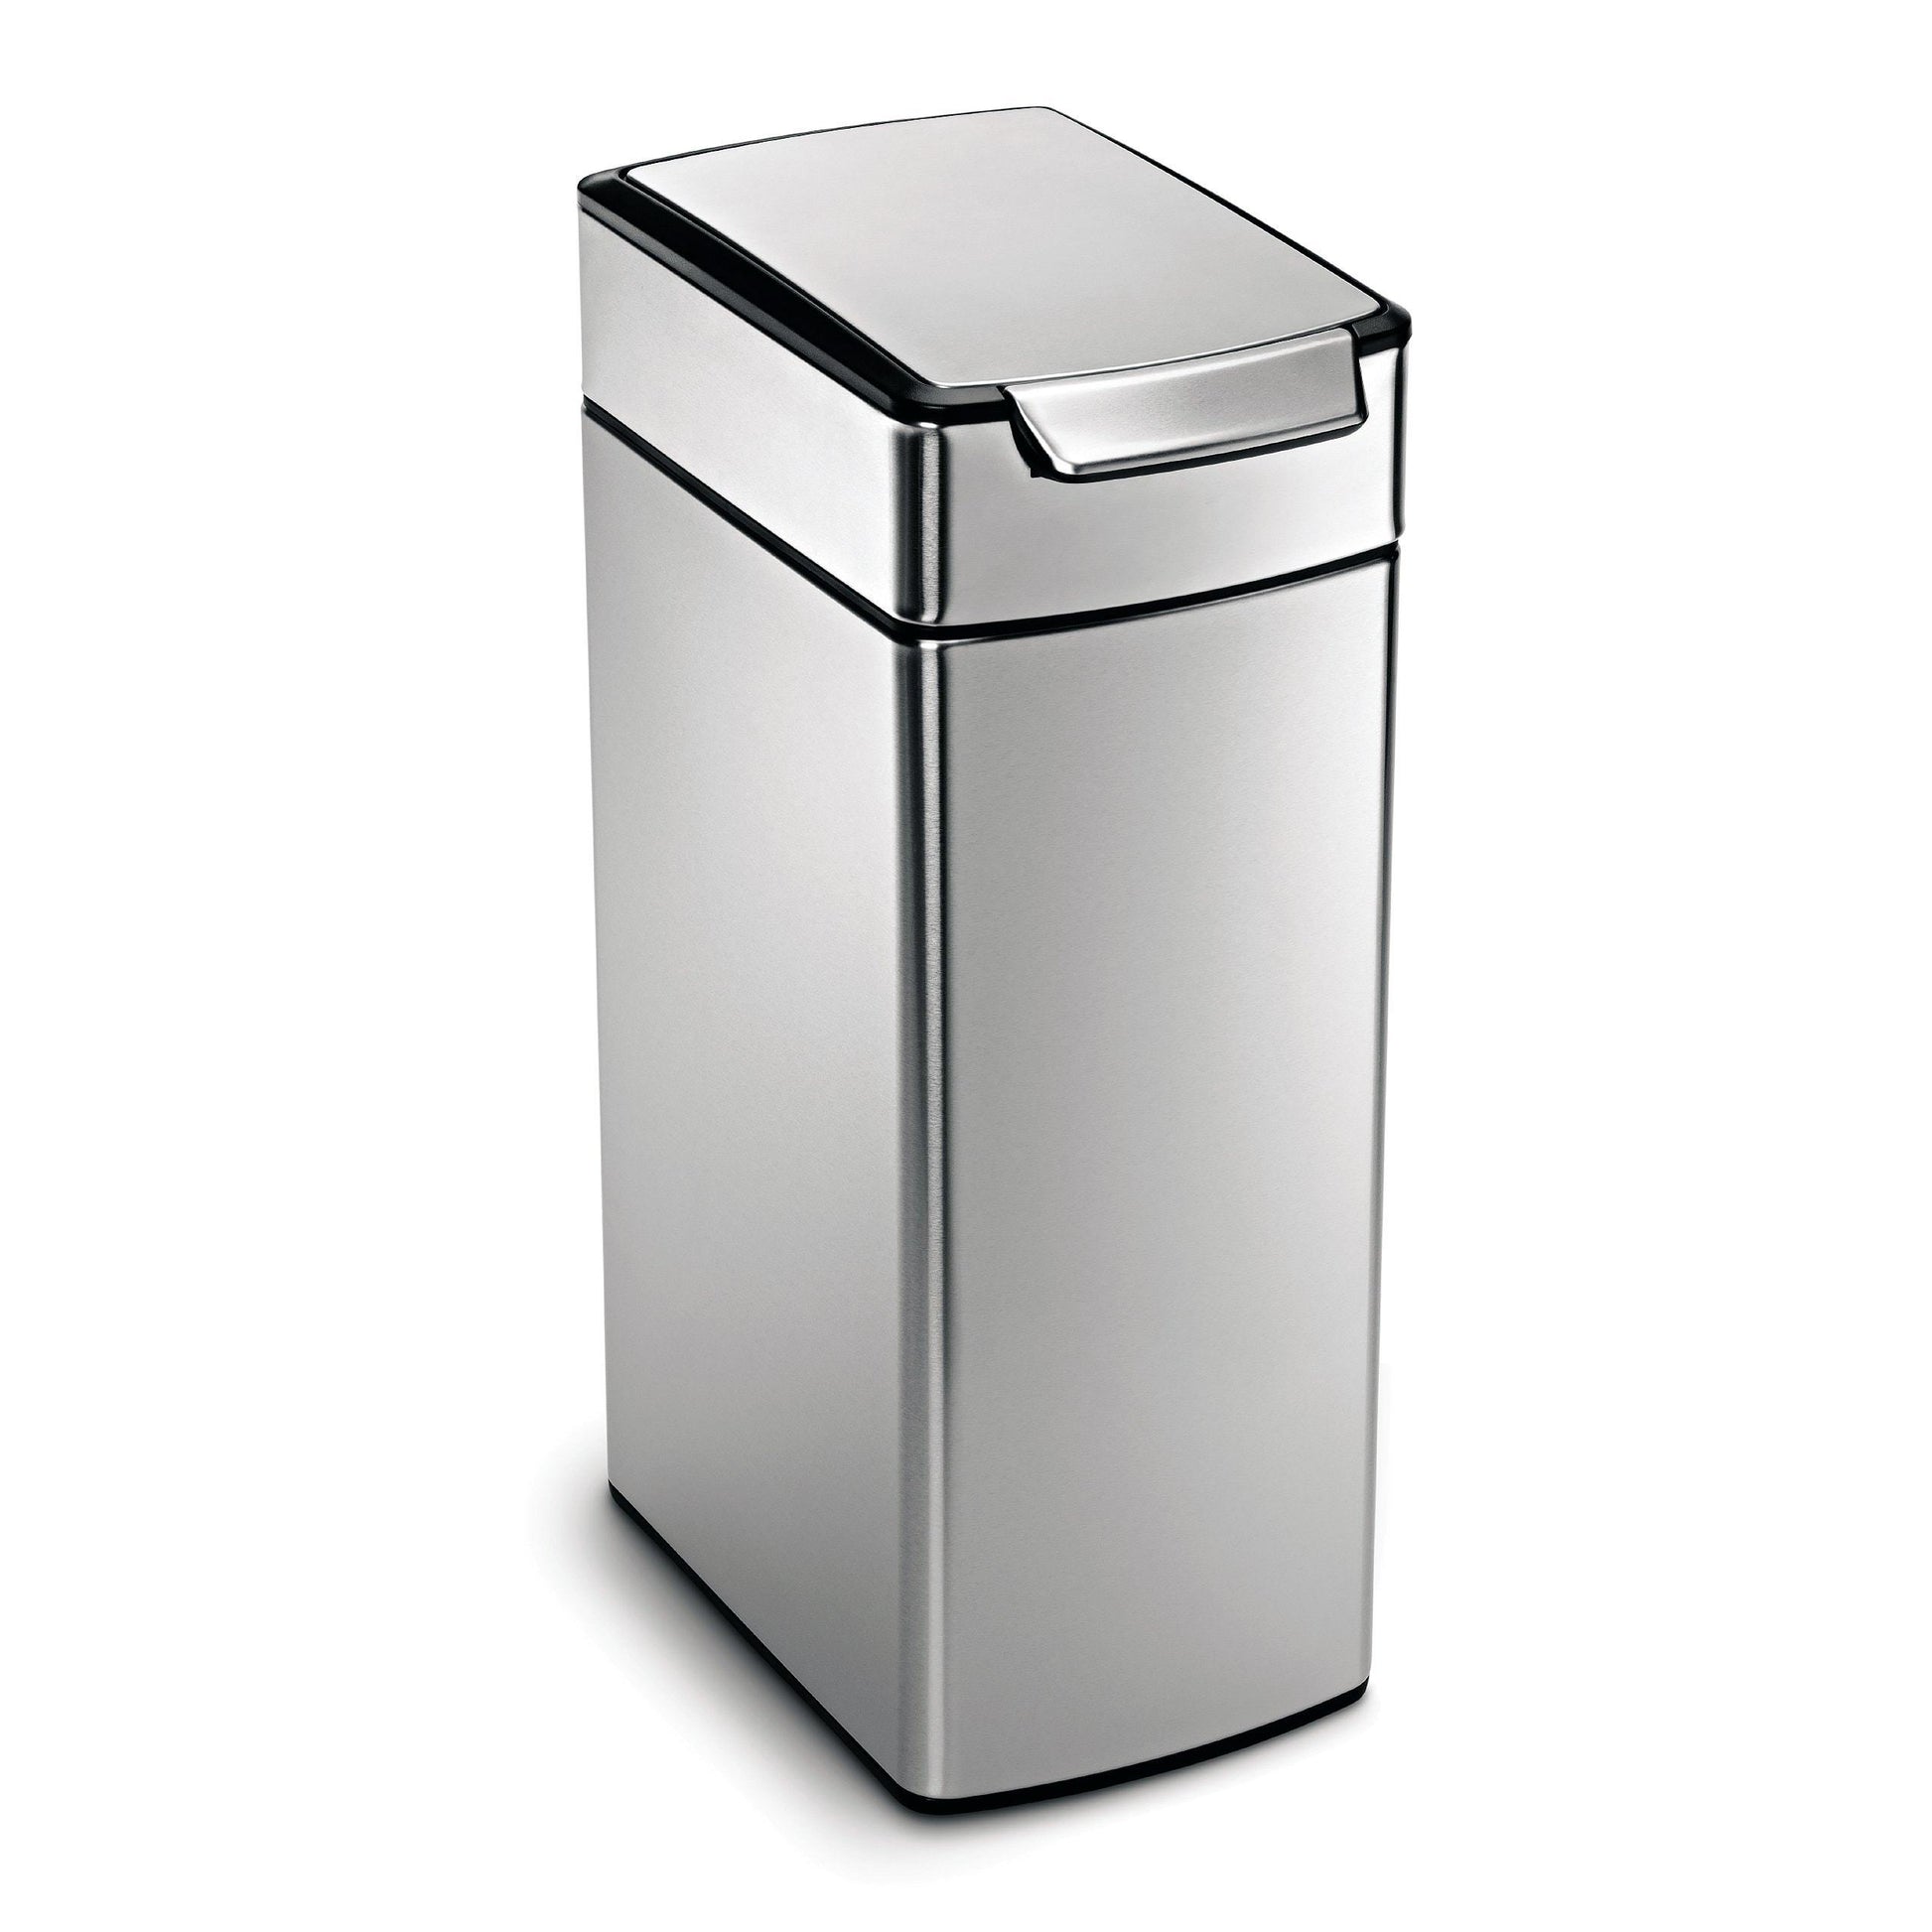 Great simplehuman 40 liter 10 6 gallon stainless steel slim touch bar kitchen trash can brushed stainless steel